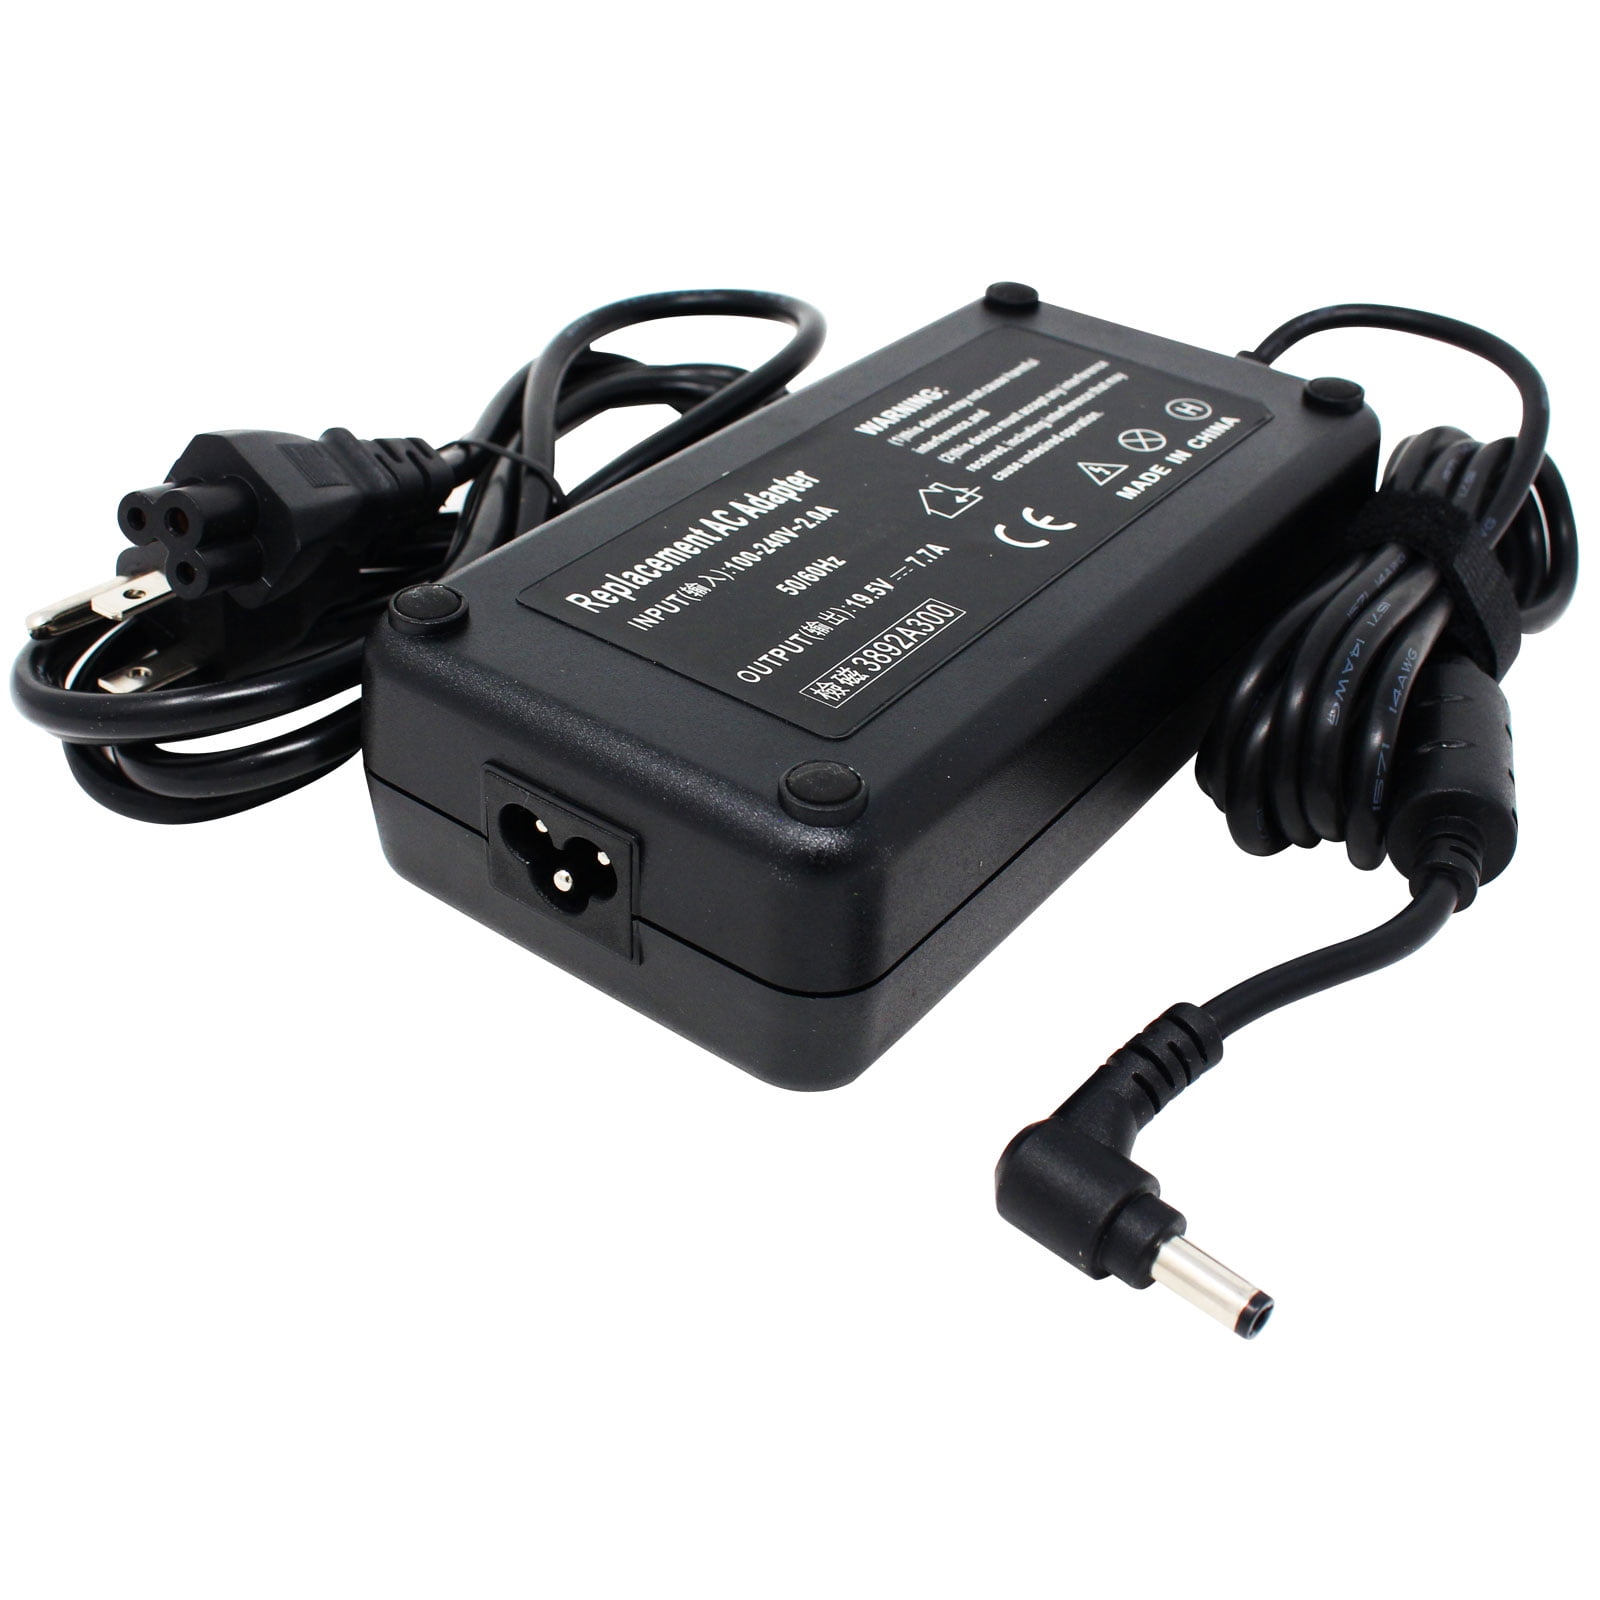 Asus ROG GL552V GL552VW Notebook PC Power supply Adapter laptop Battery charger 